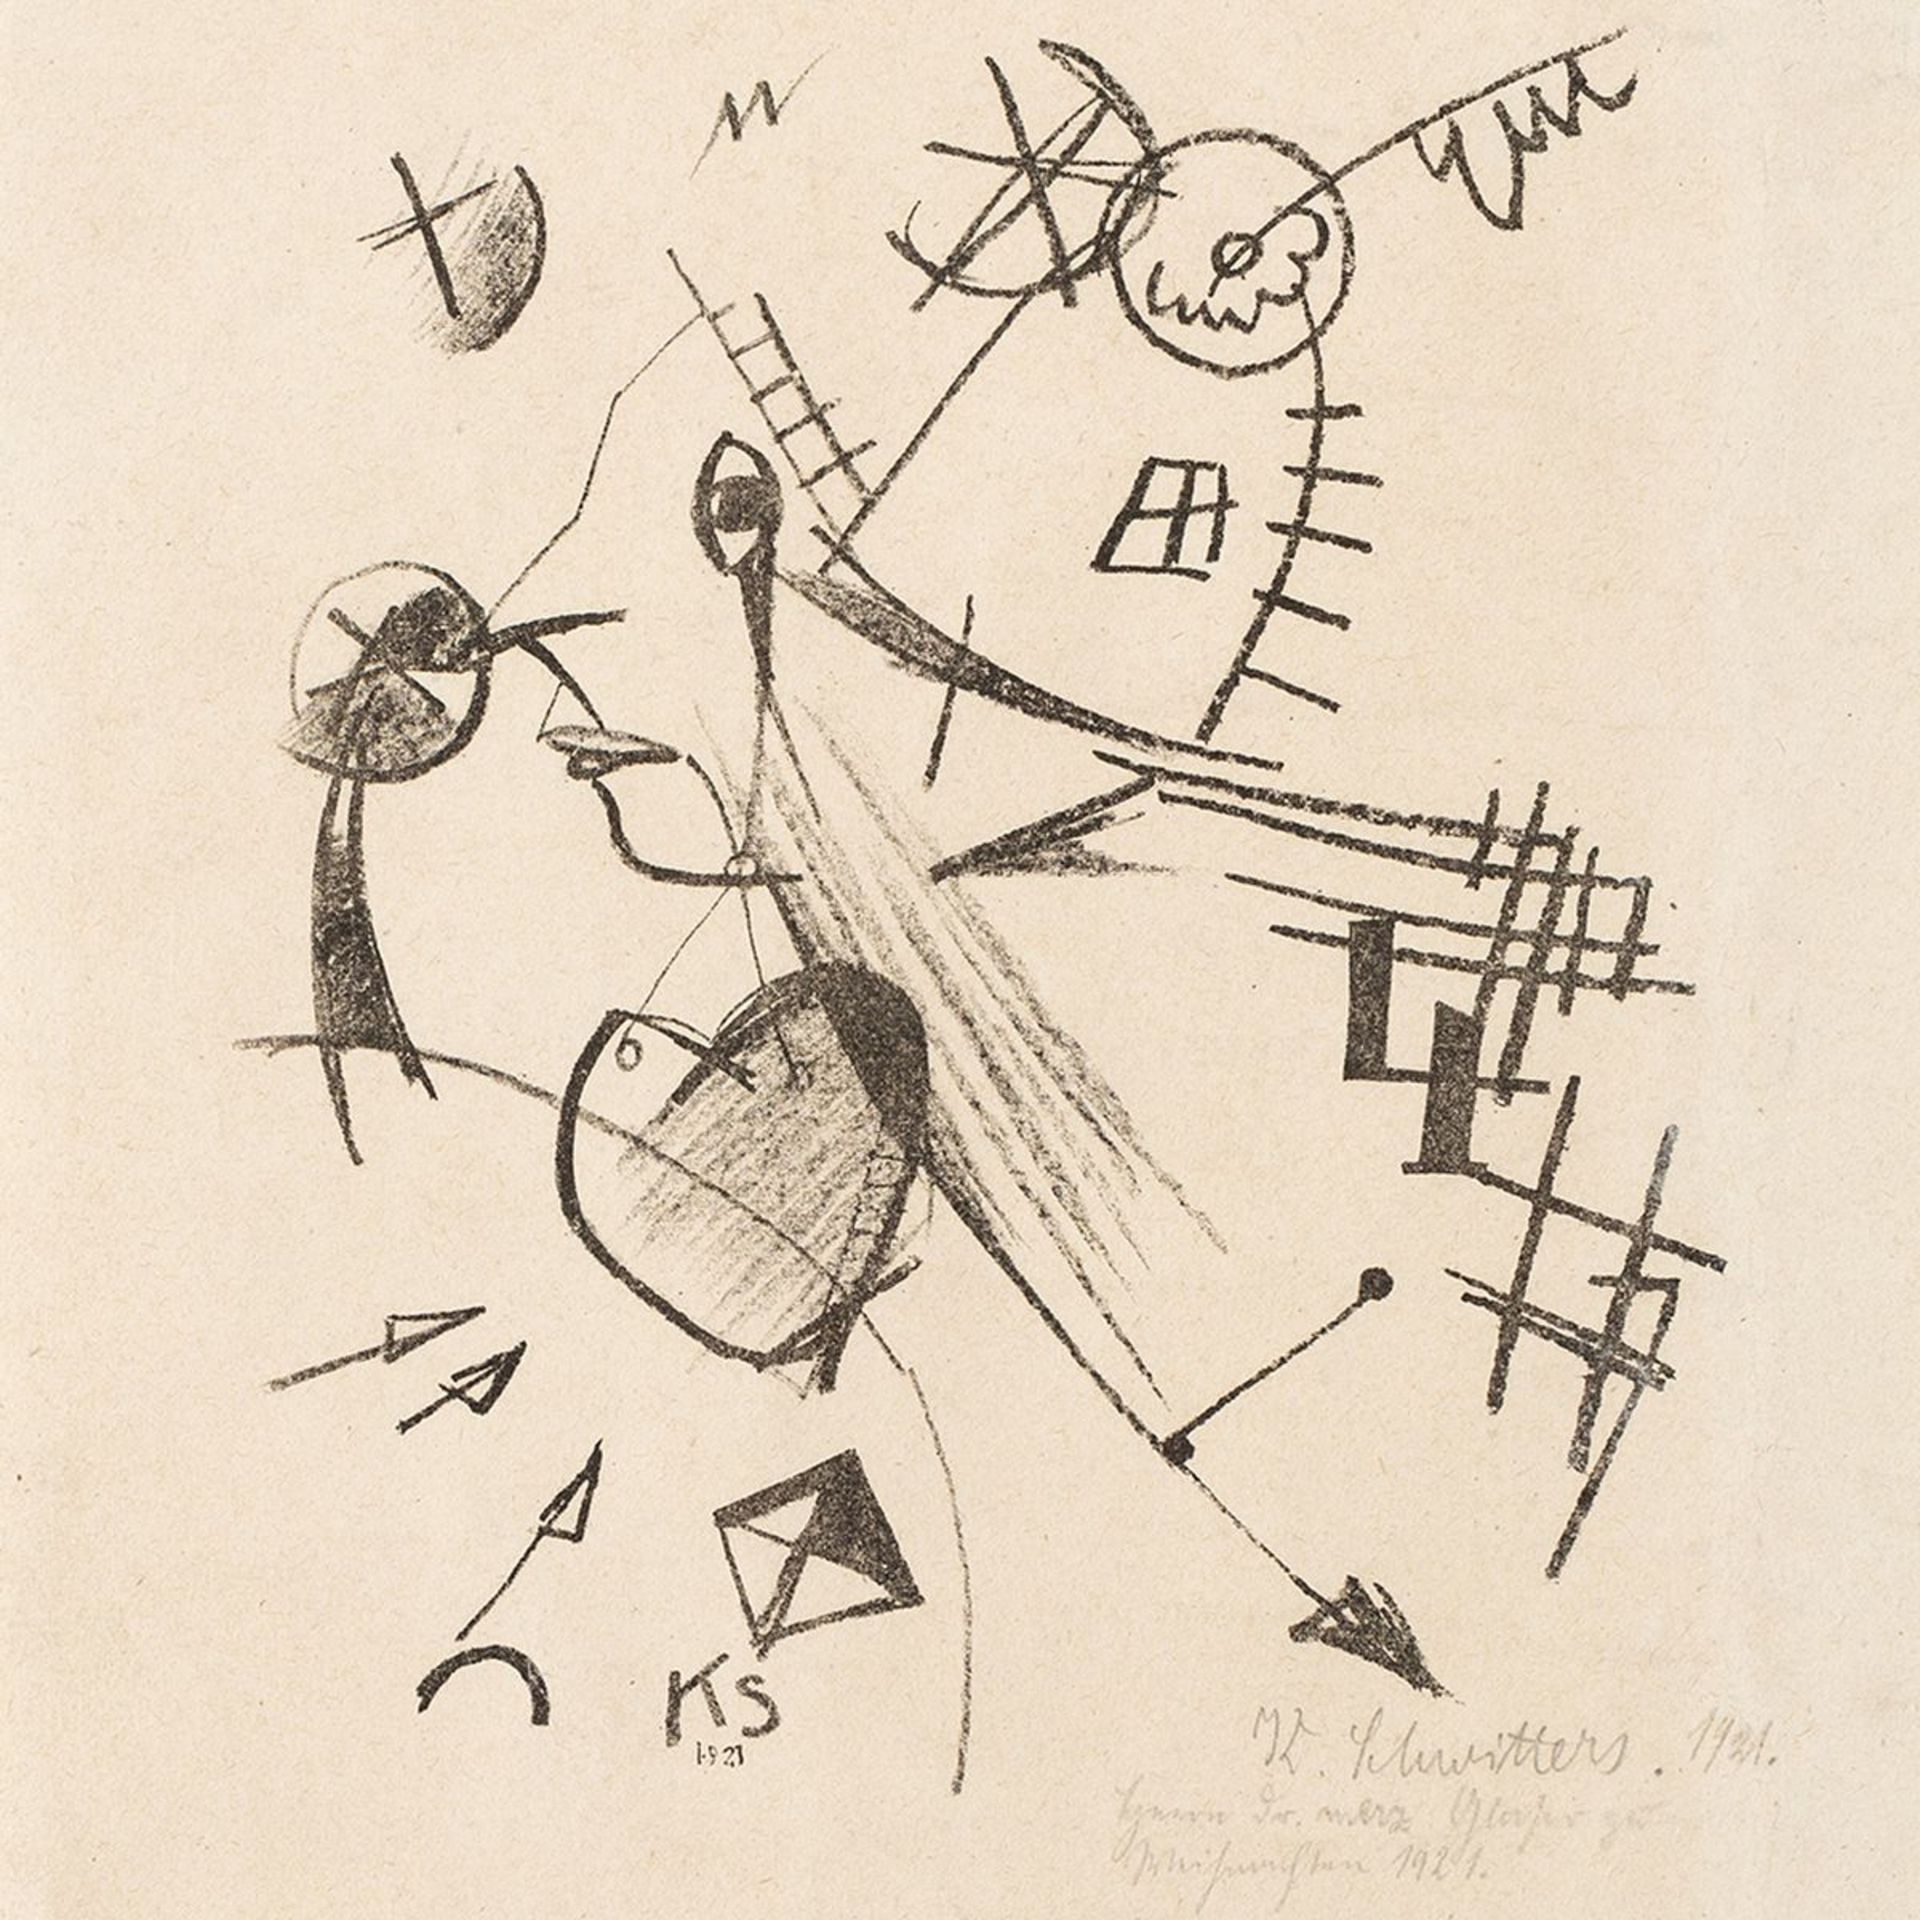 Kurt Schwitters, "Composition with head" 1921 - Image 9 of 9